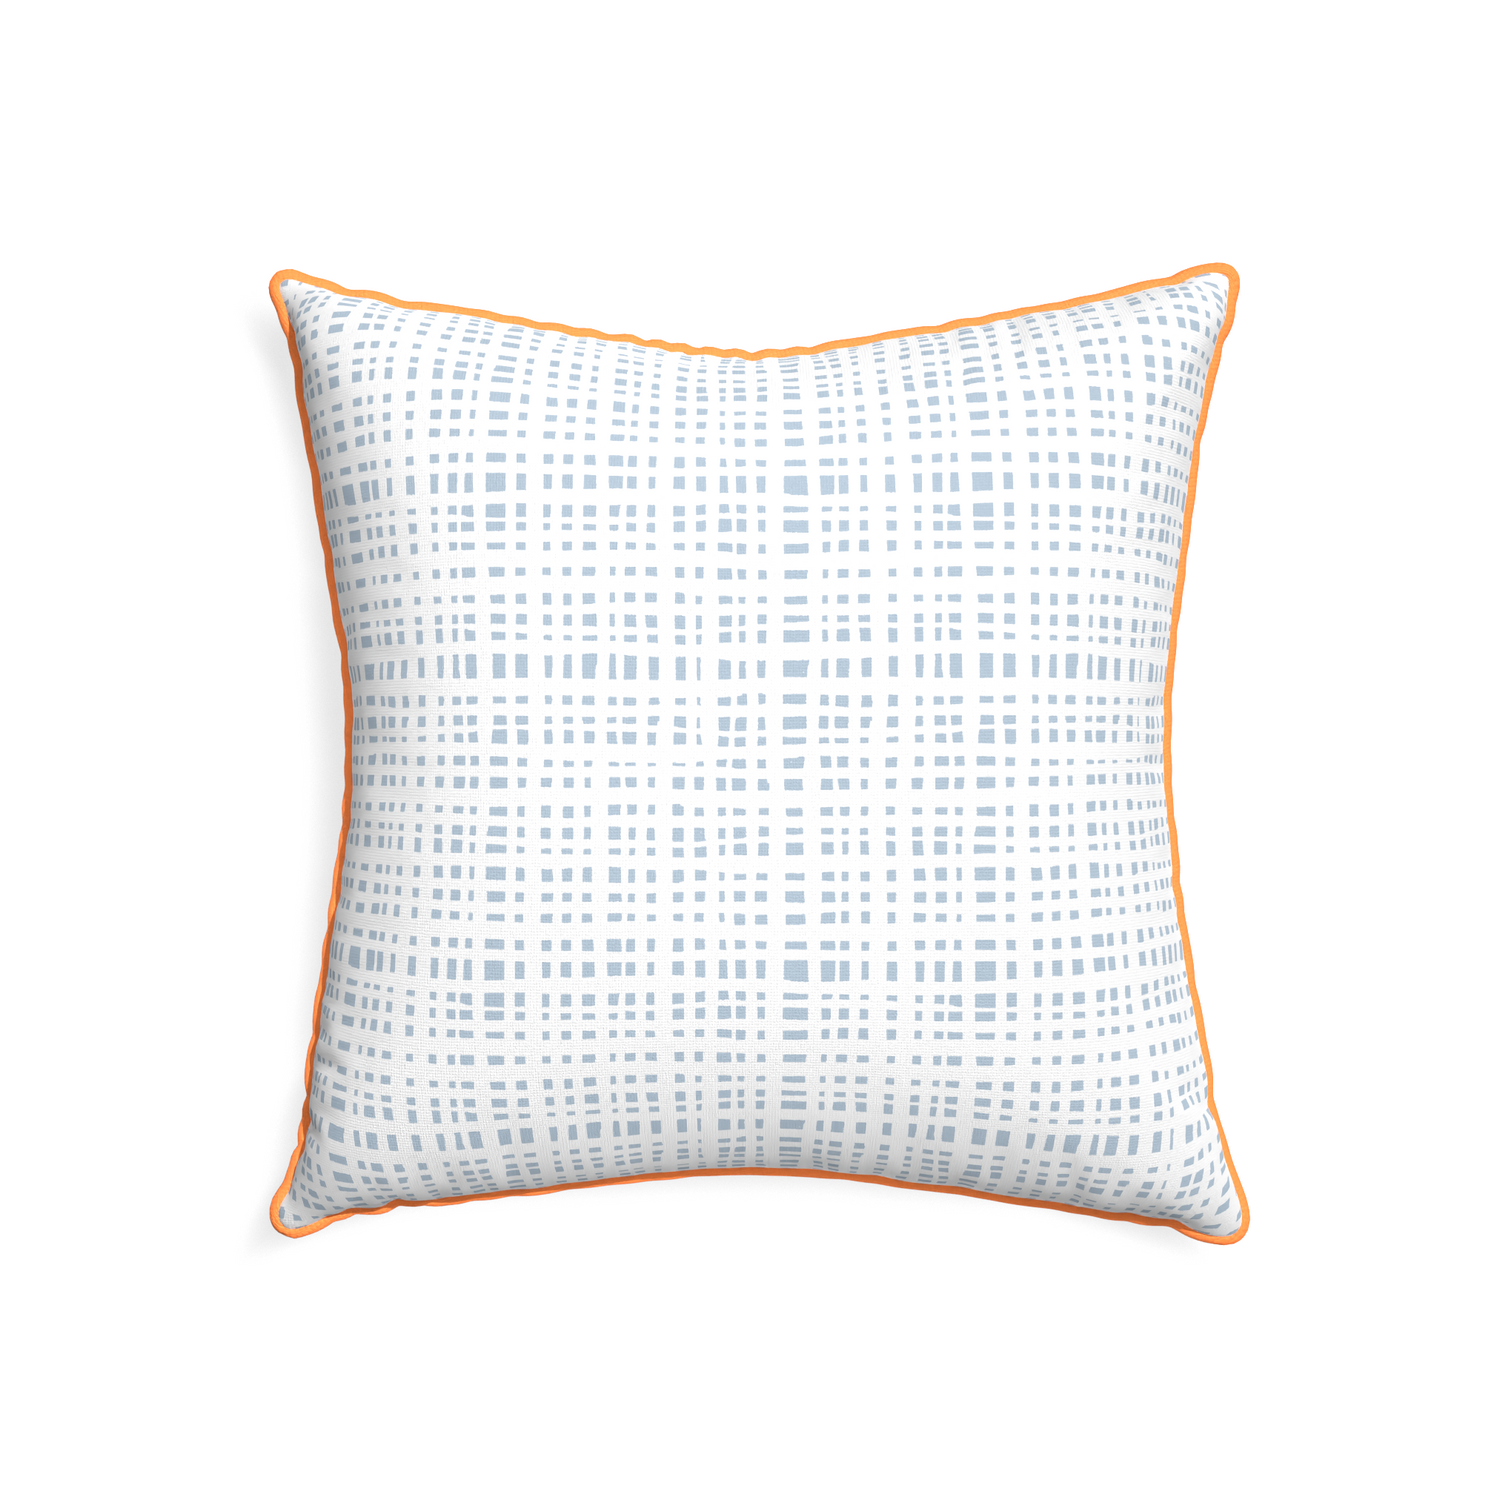 22-square ginger custom plaid sky bluepillow with clementine piping on white background